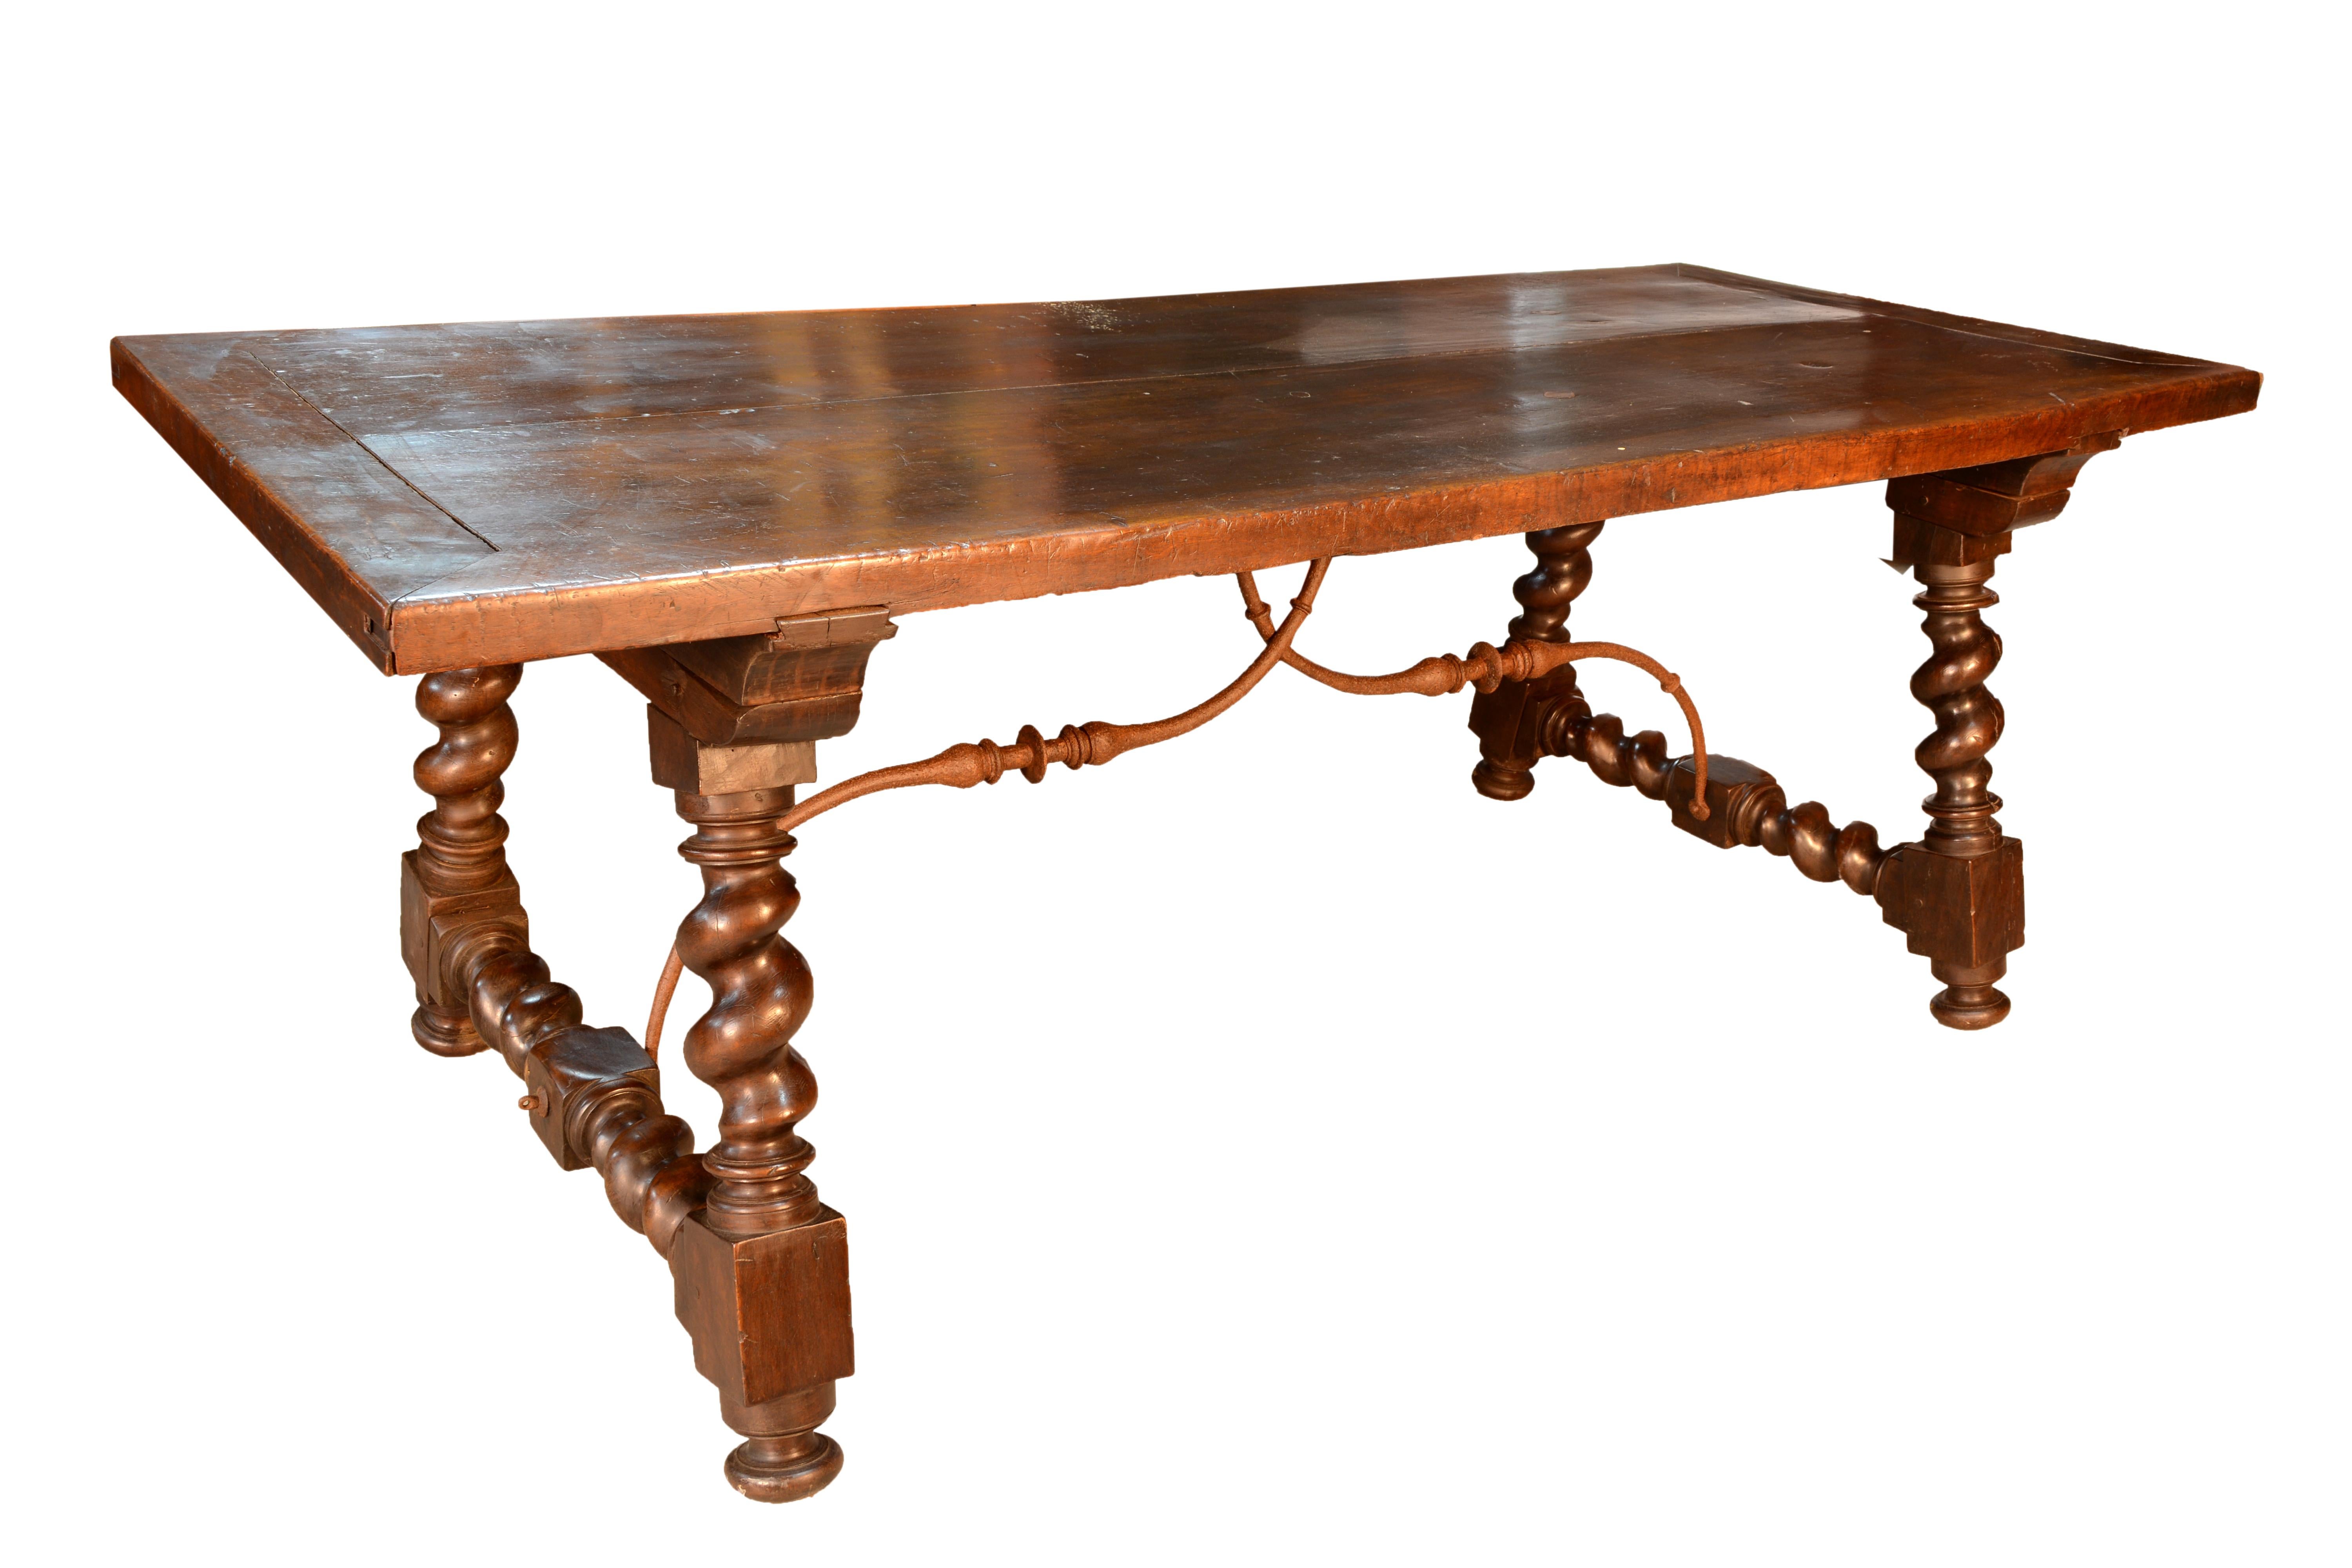 Dining table with two-piece header board on legs with Solomonic turning and chamfer attached to it with curved wrought iron fasteners, following Baroque models